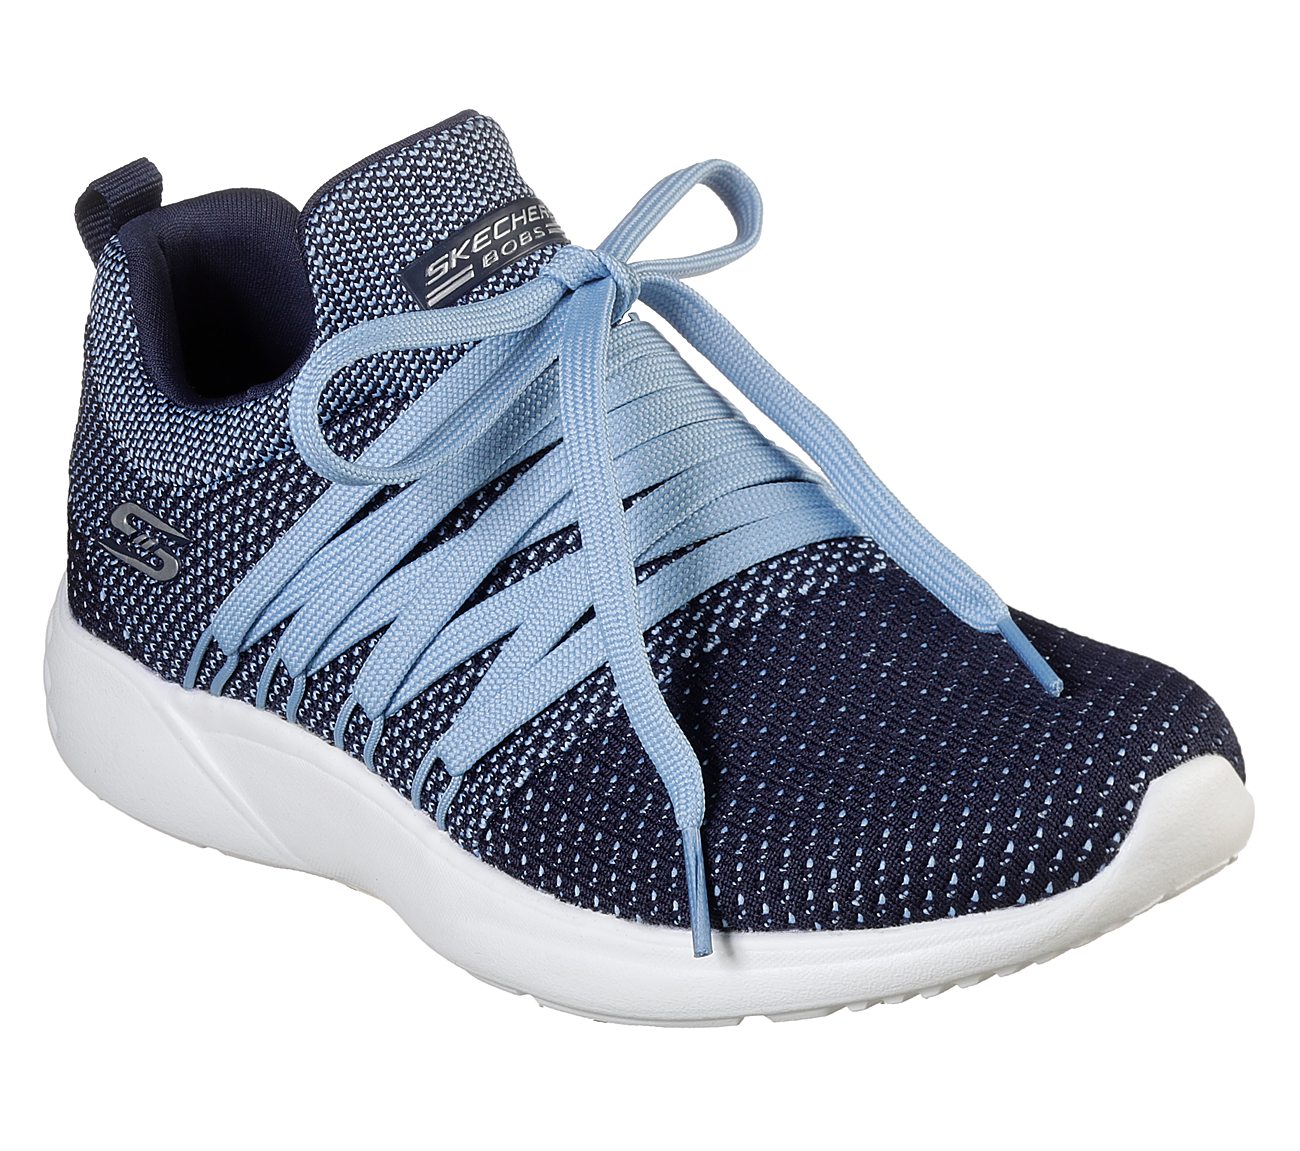 BOBS SPARROW - SNEAKER CLUB, NAVY/BLUE Footwear Lateral View